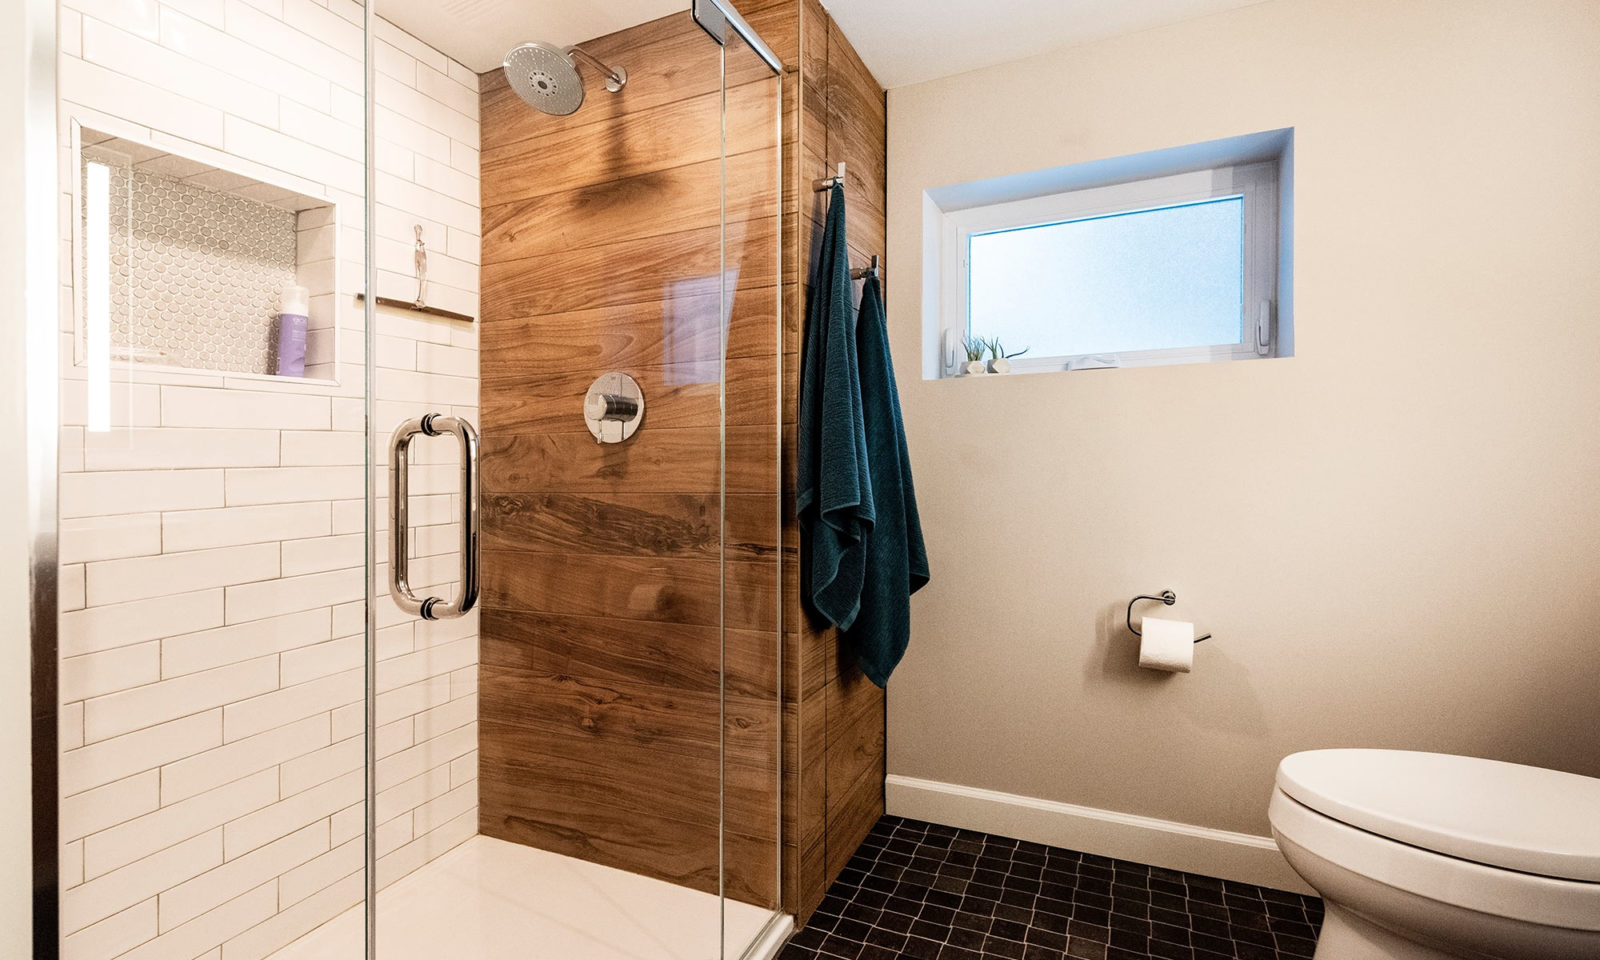 view of shower with white subway tile and wood looking tile